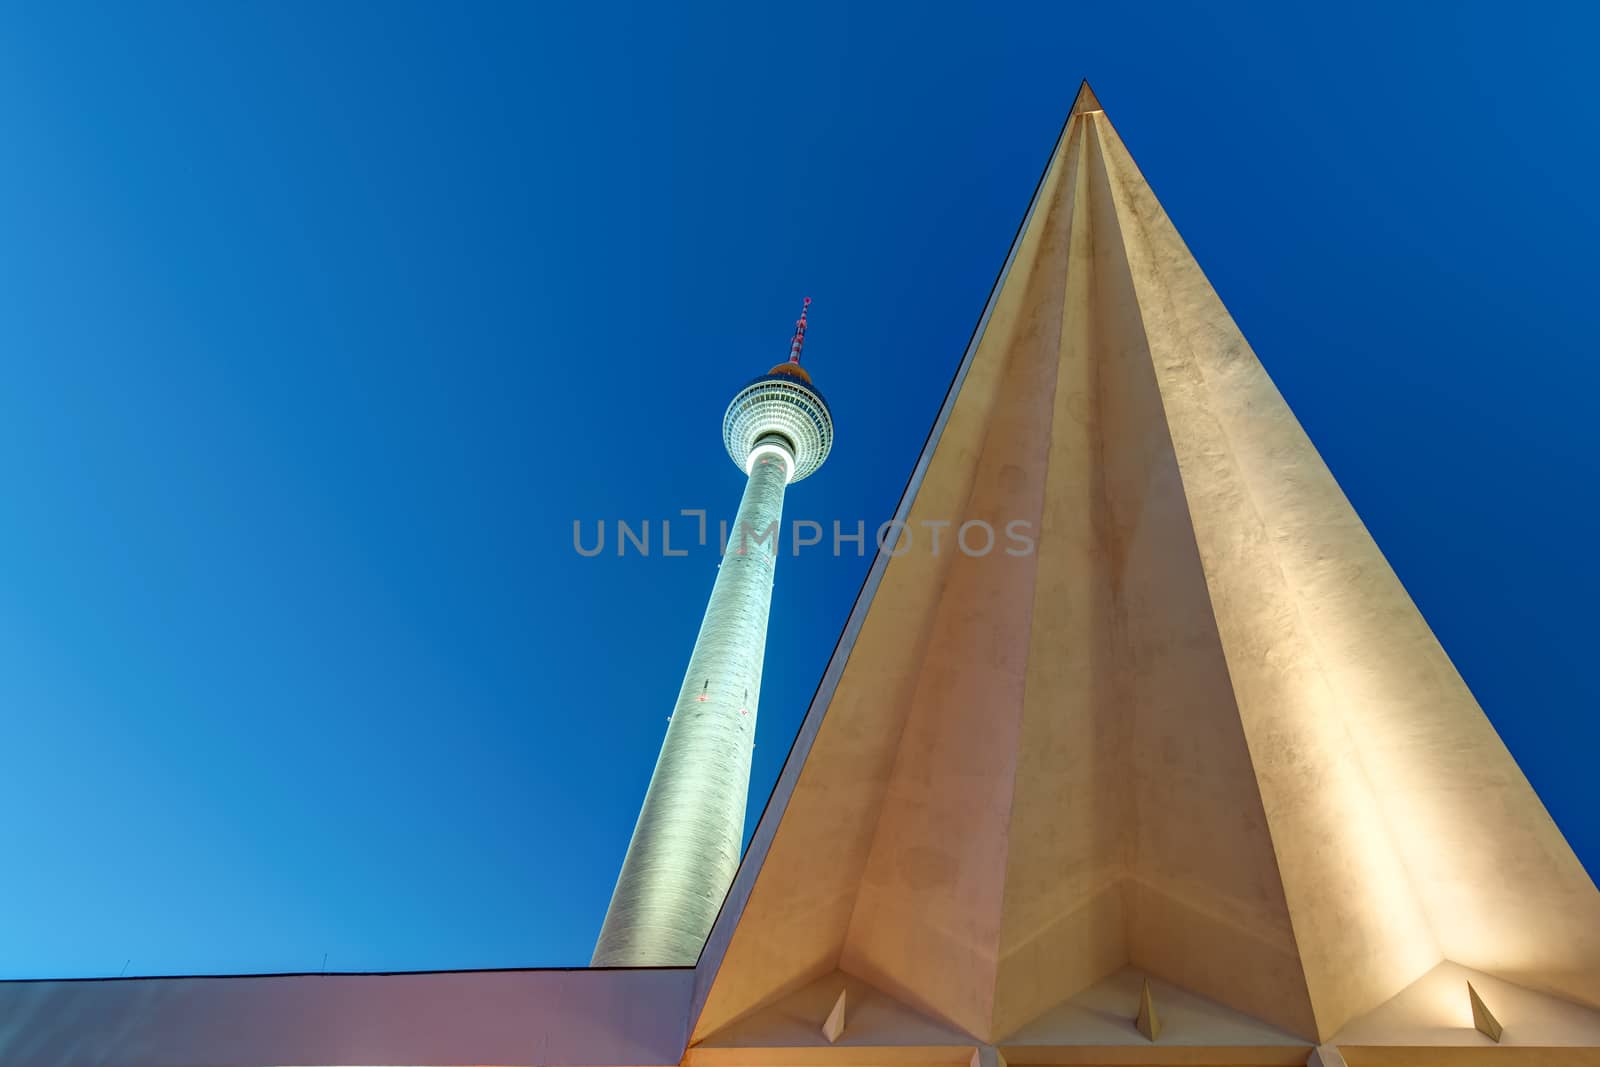 Different view of the famous TV Tower in Berlin at night